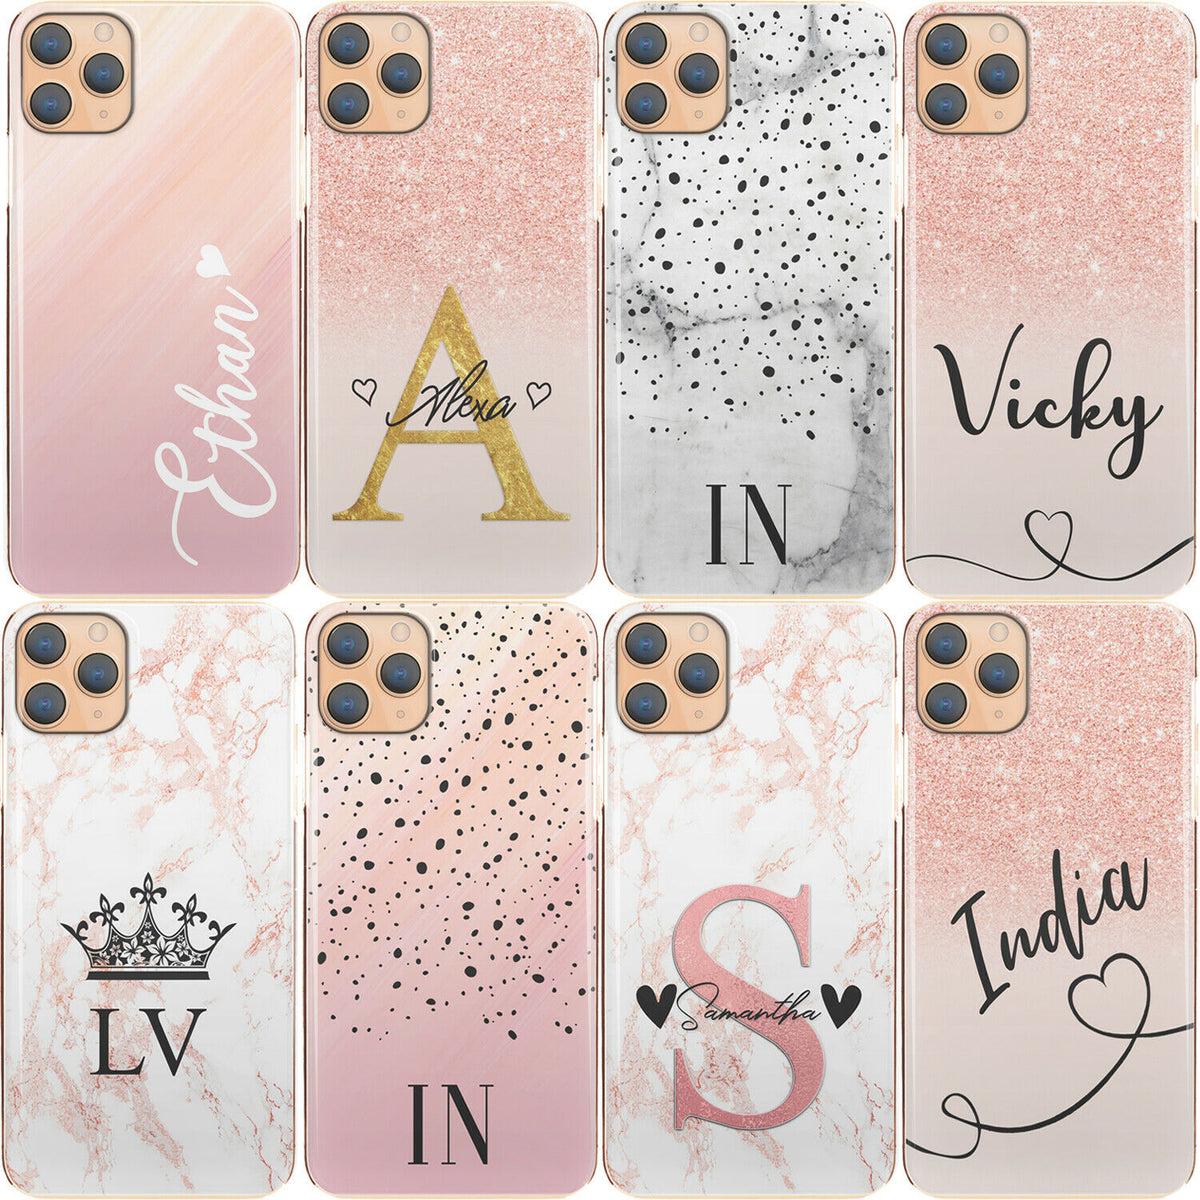 Personalised Phone Case For iPhone XS MAX, Initial Grey/Pink Marble Hard Cover